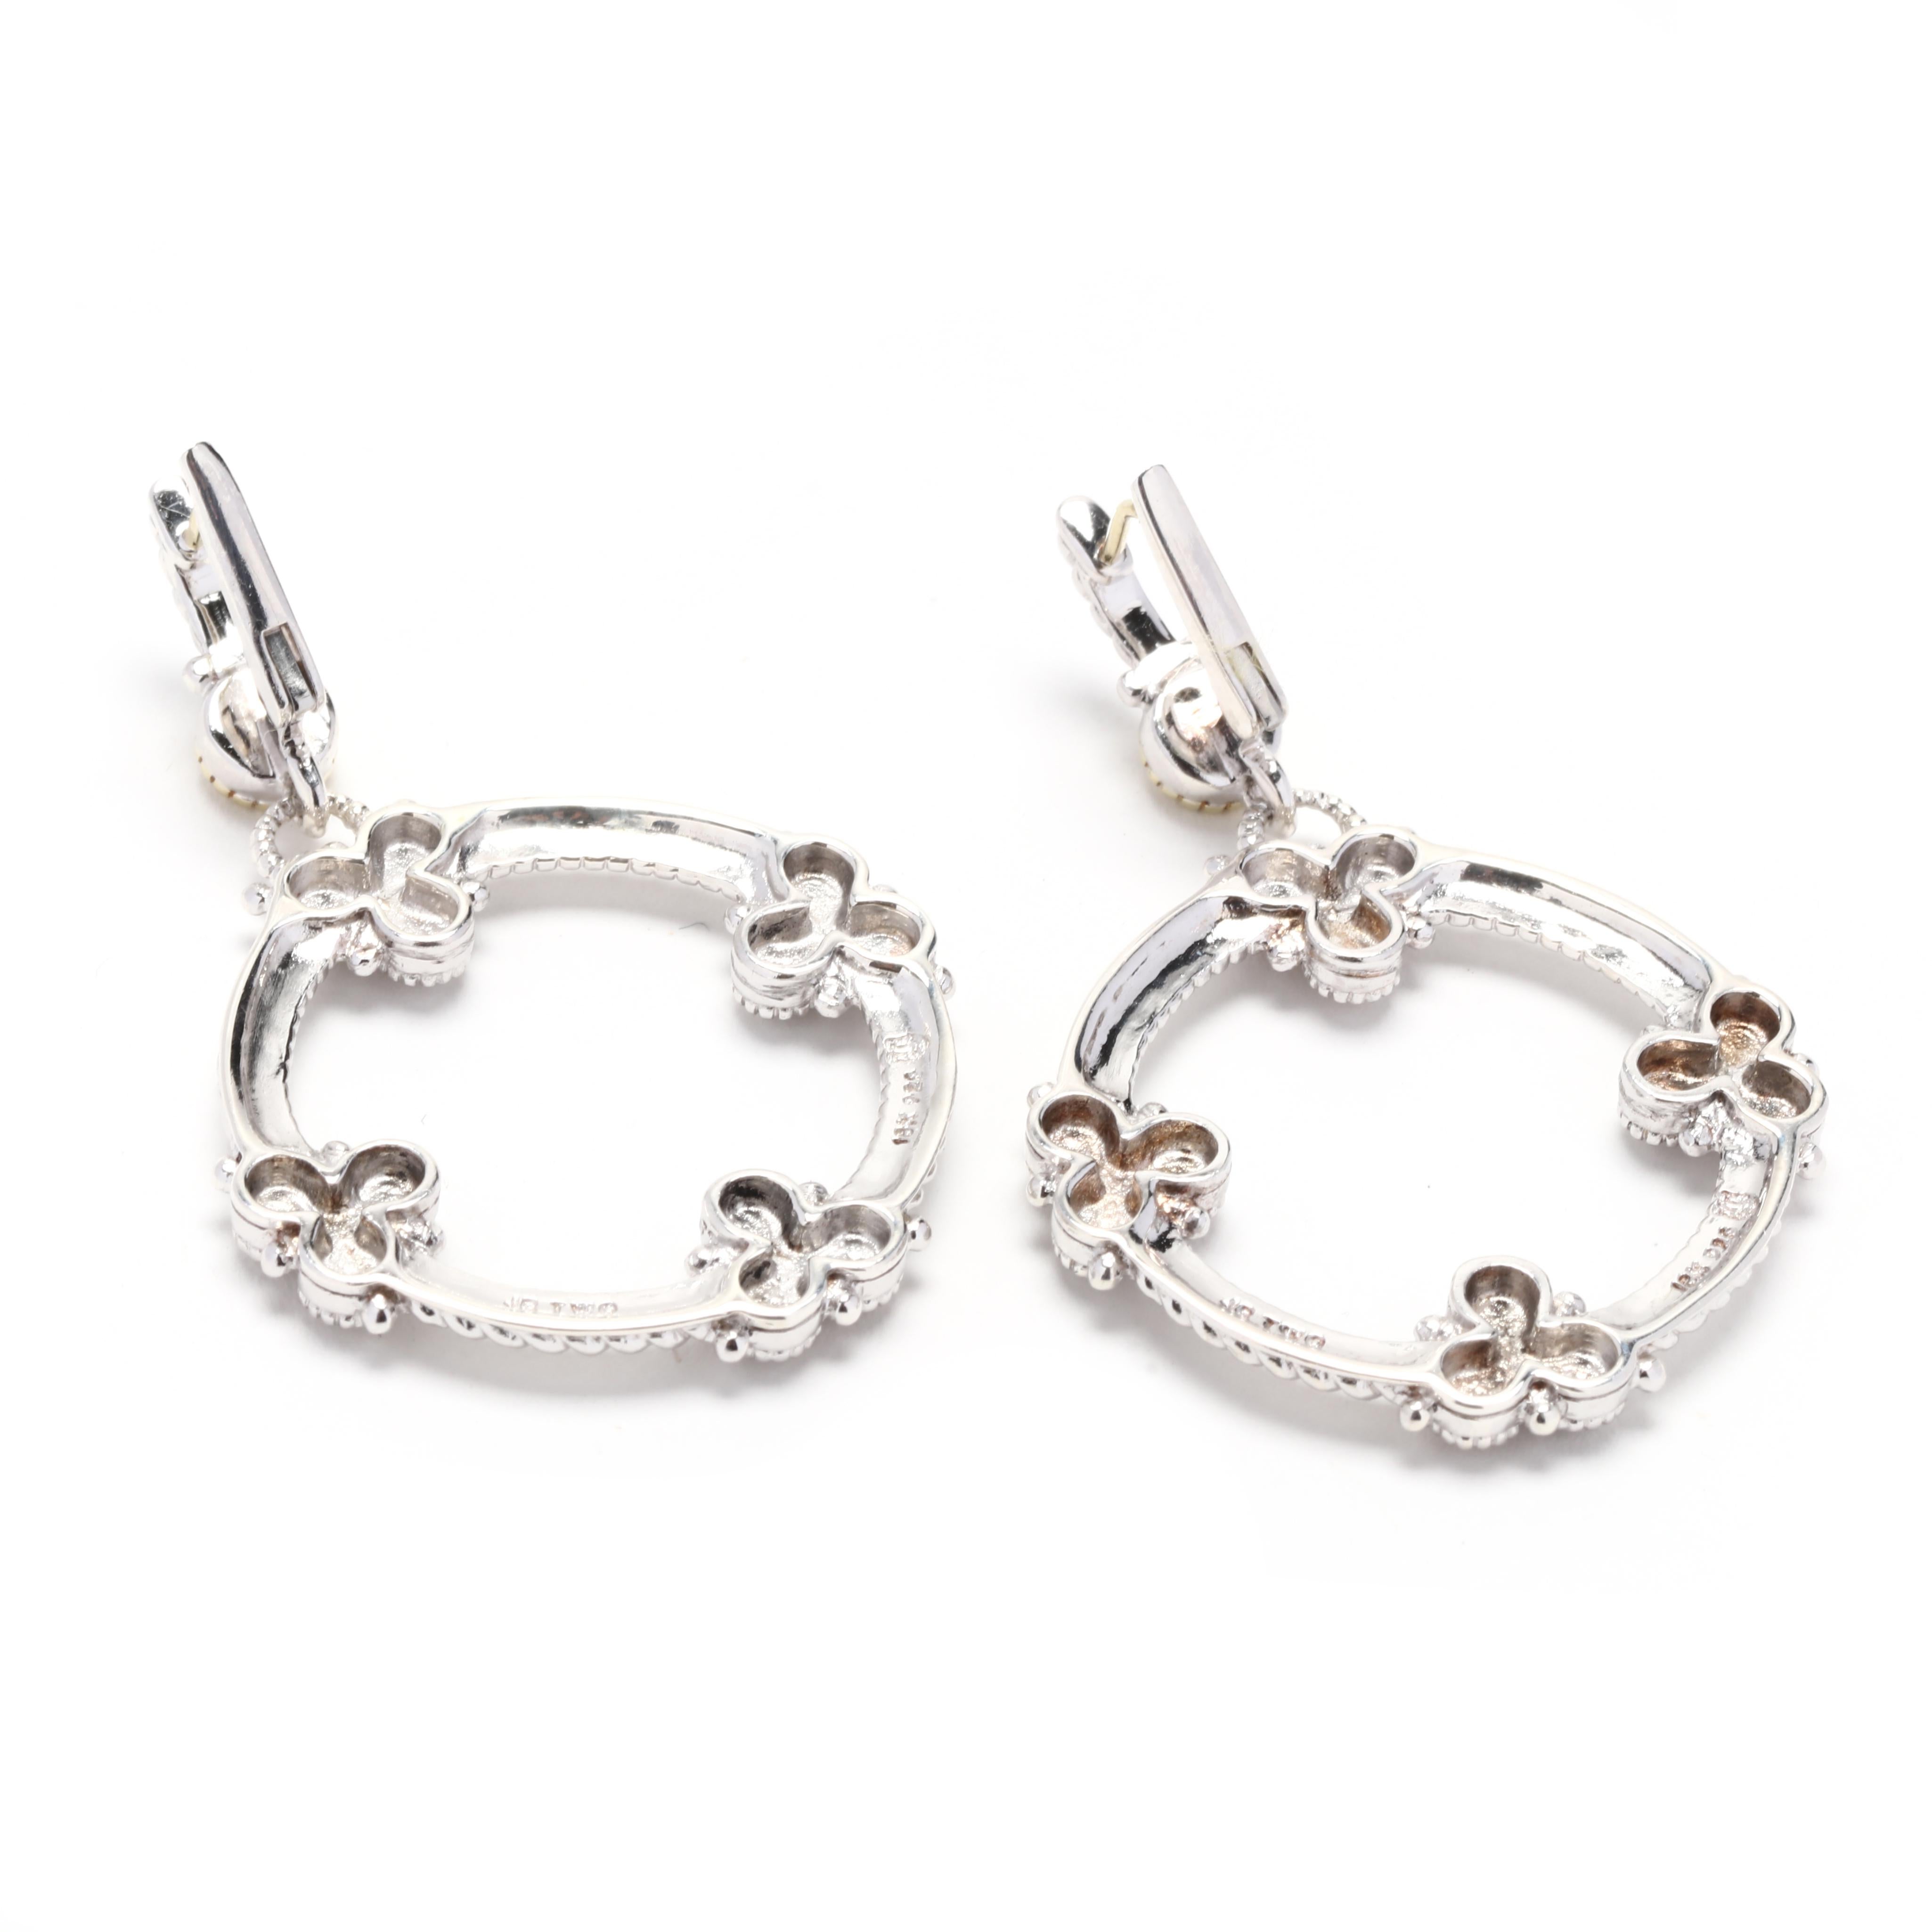 These stunning Judith Ripka Round Diamond Dangle Earrings are a perfect combination of elegance and sophistication. Crafted in 18k yellow gold and sterling silver, these earrings feature a round diamond dangling from a stylish design. The diamonds